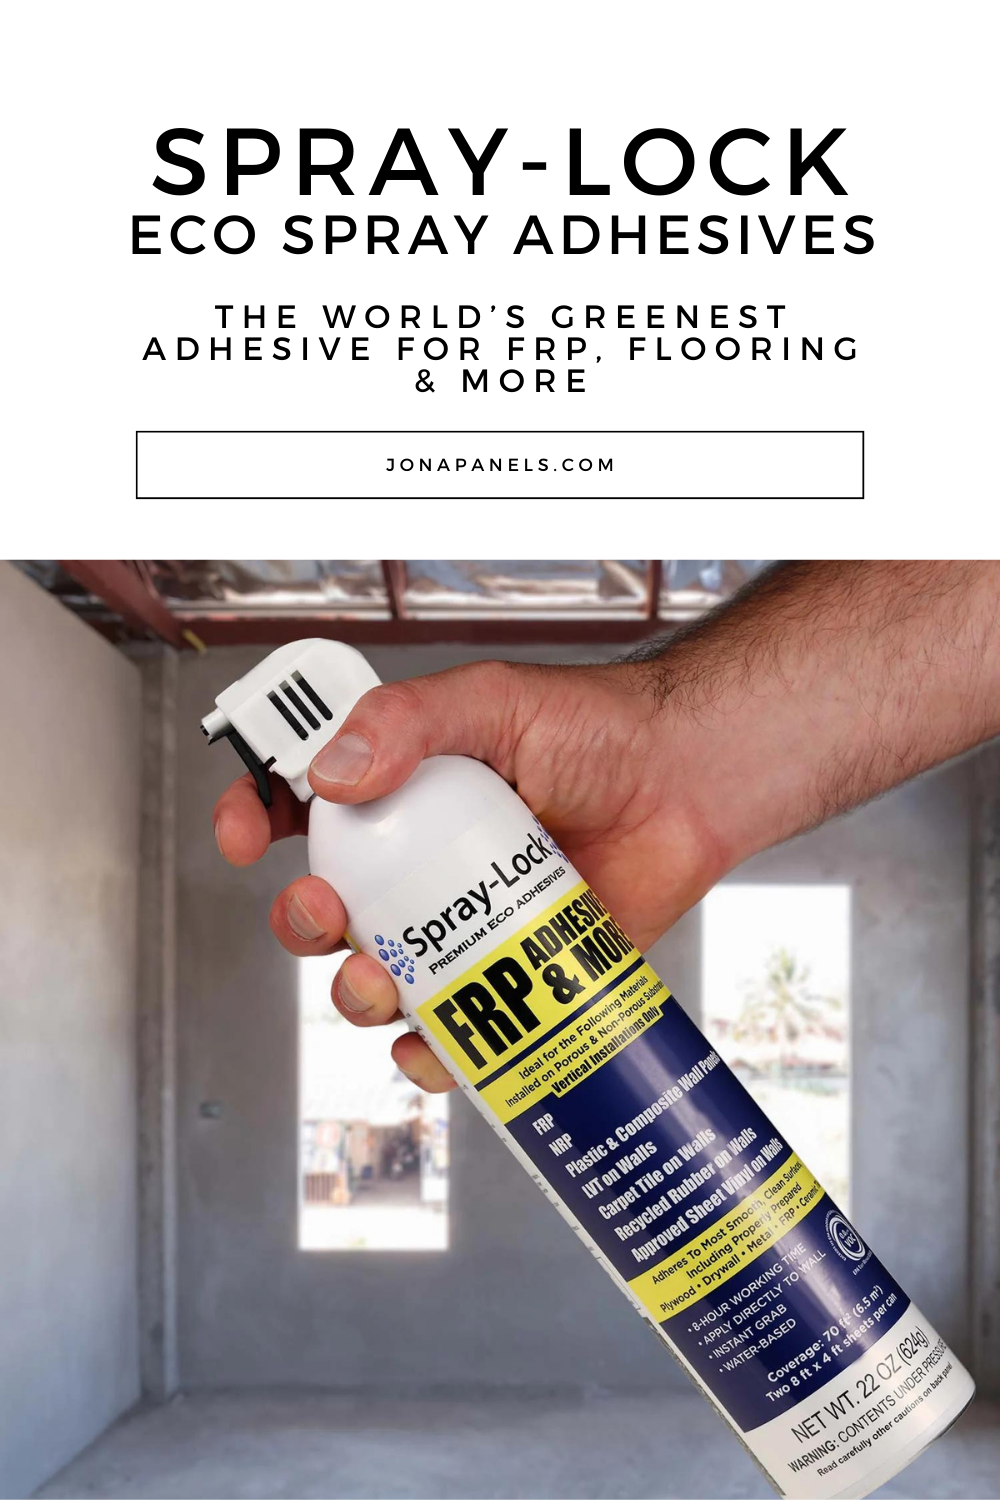 Spray adhesive for flooring and walls